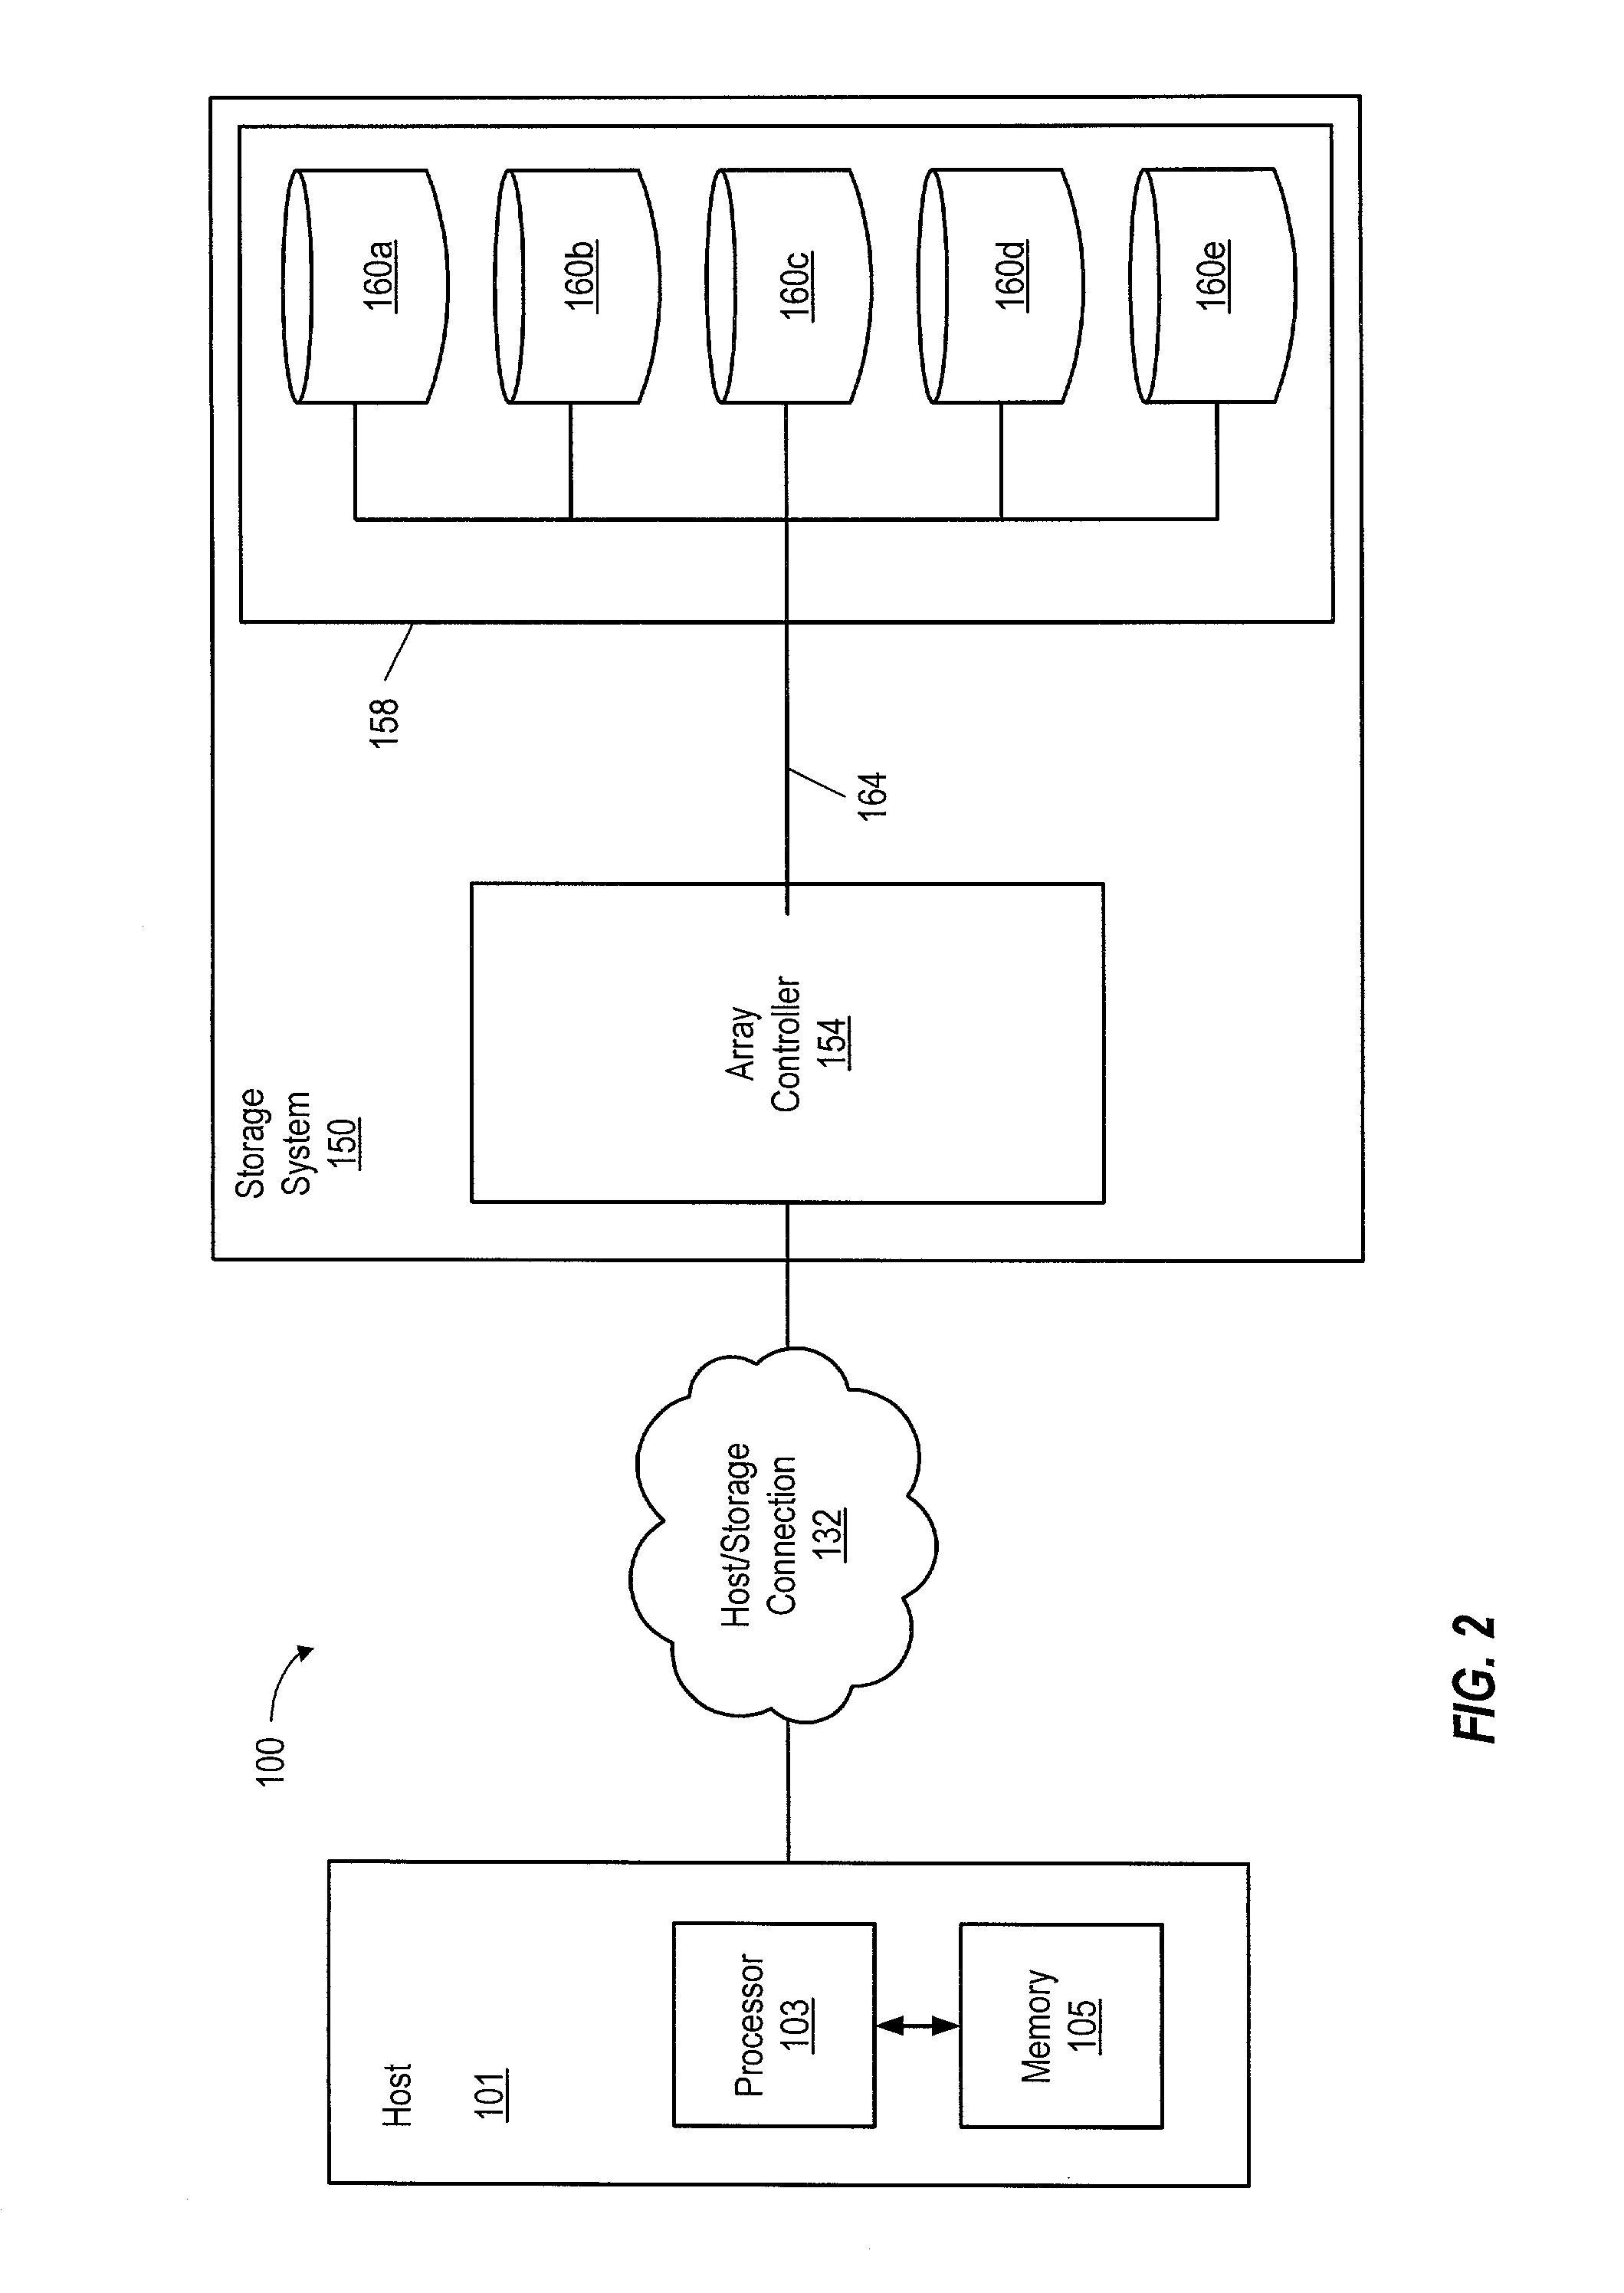 System and method for determining availability of an arbitrary network configuration